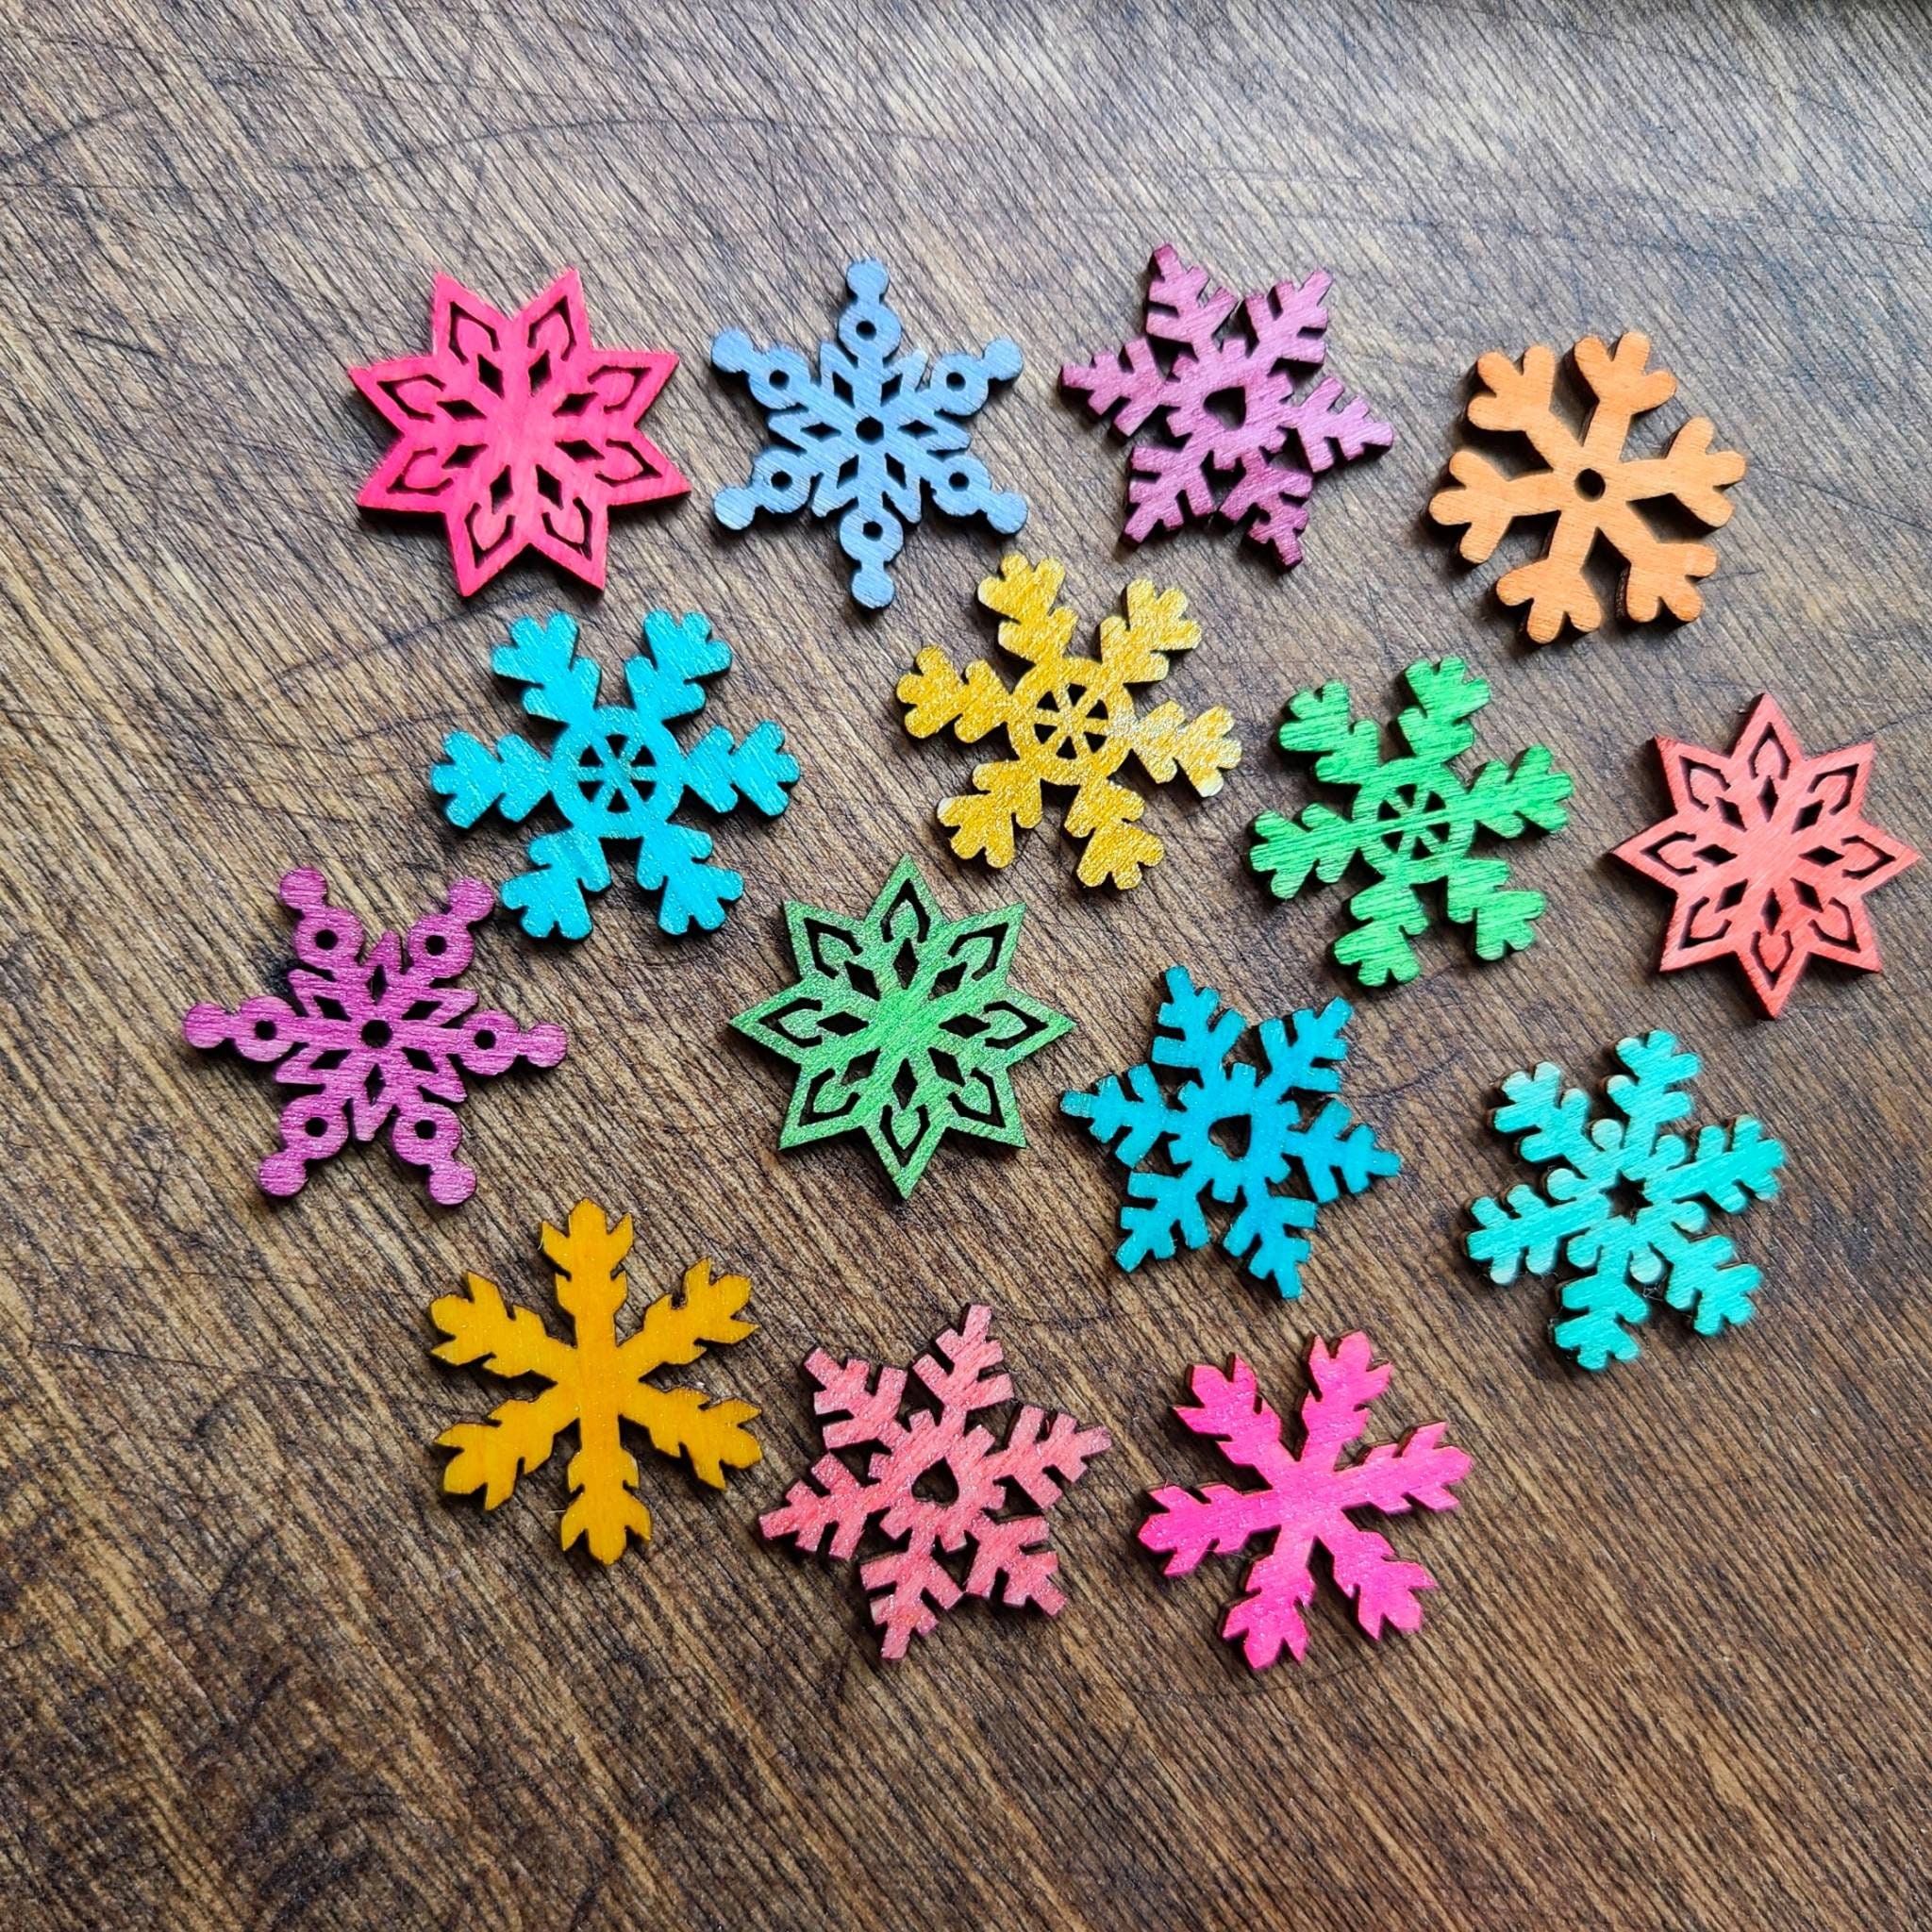 Set of Mini Snowflake Magnets. Painted Wood Snow Flakes. Cute Pastel  Christmas Decor Snowflakes, Shimmery Sparkly Winter Fridge Magnets. 